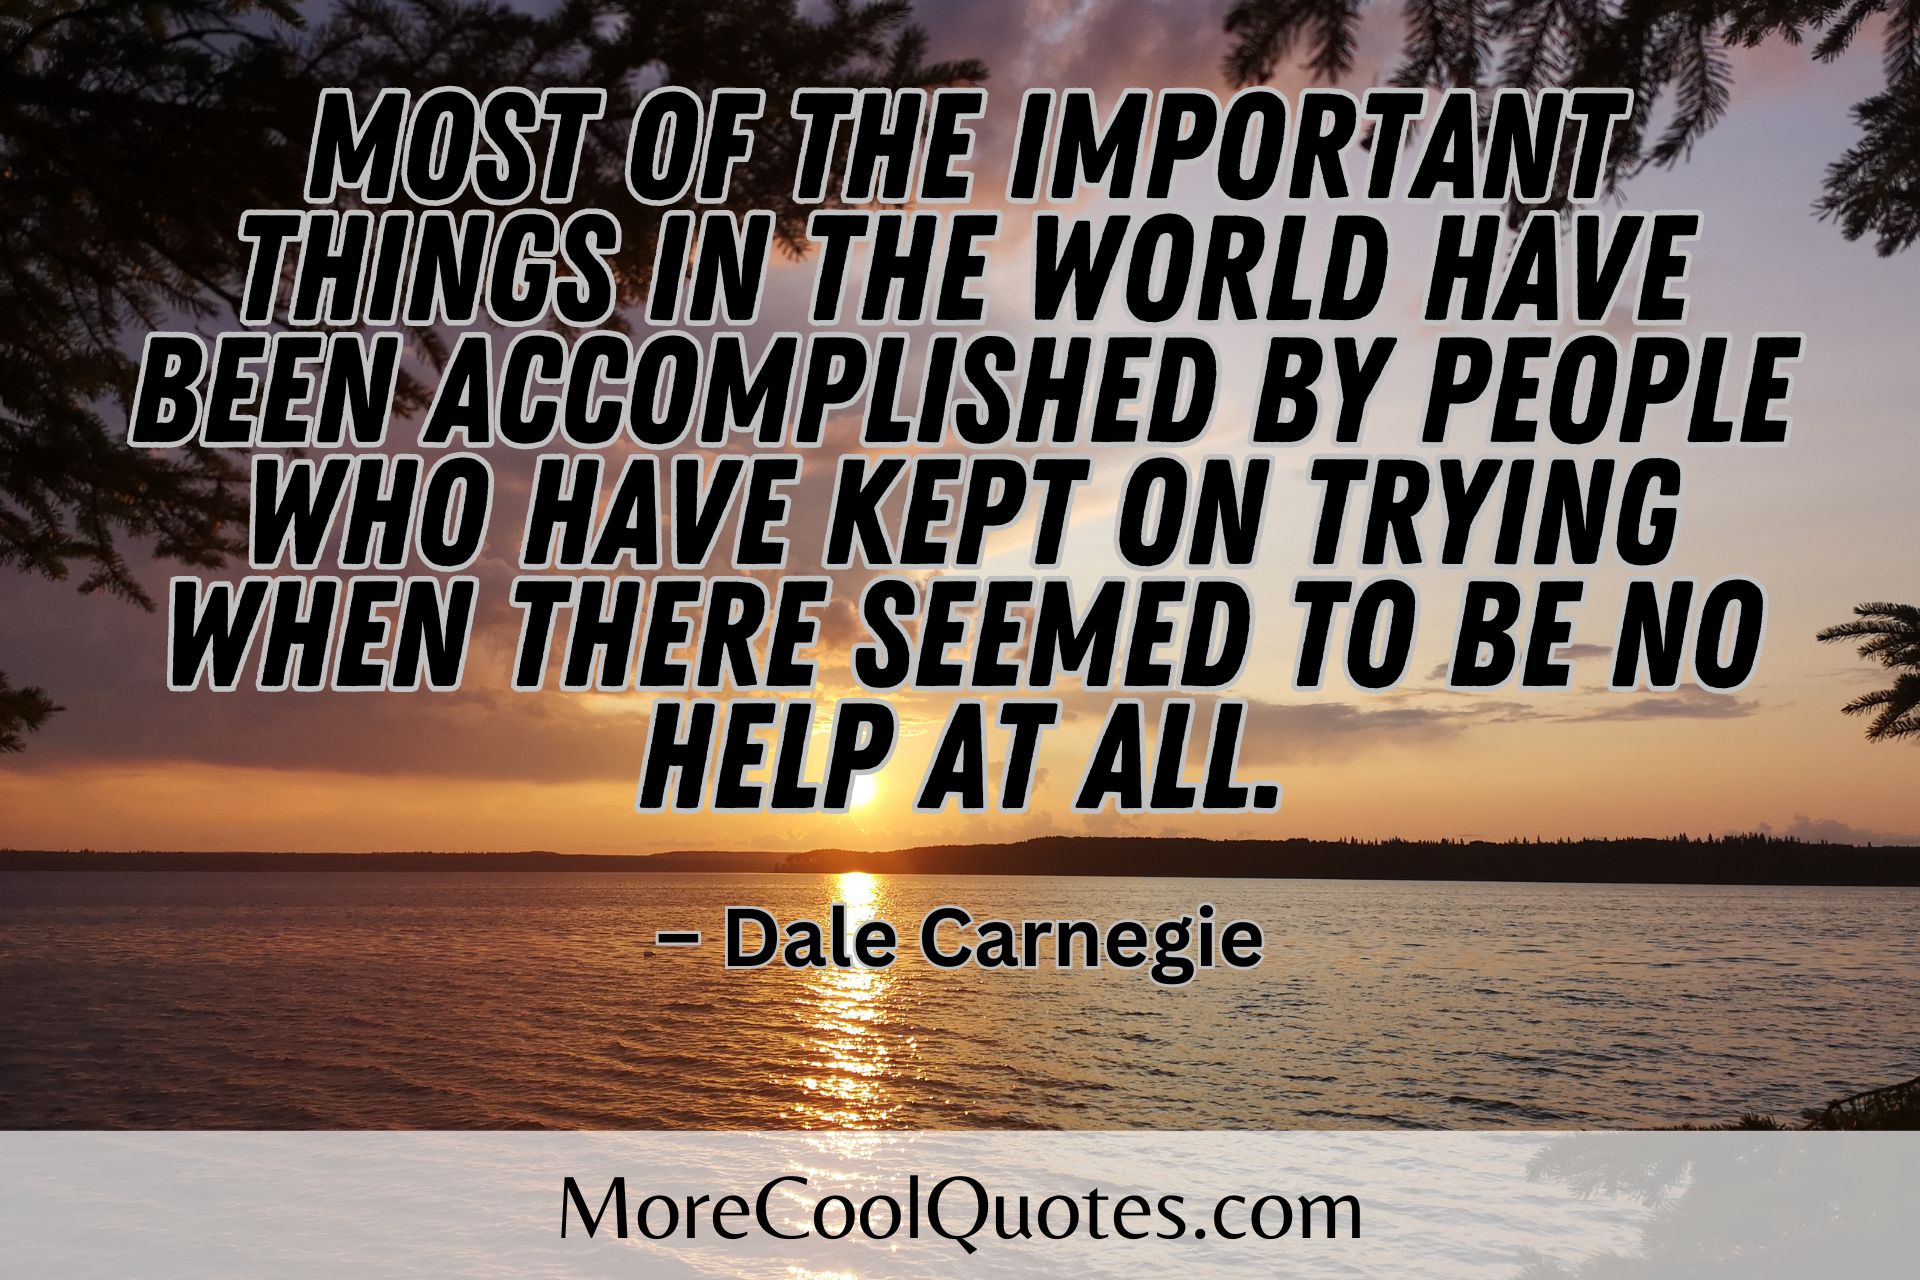 Most of the important things in the world have been accomplished by people who have kept on trying when there seemed to be no help at all. – Dale Carnegie